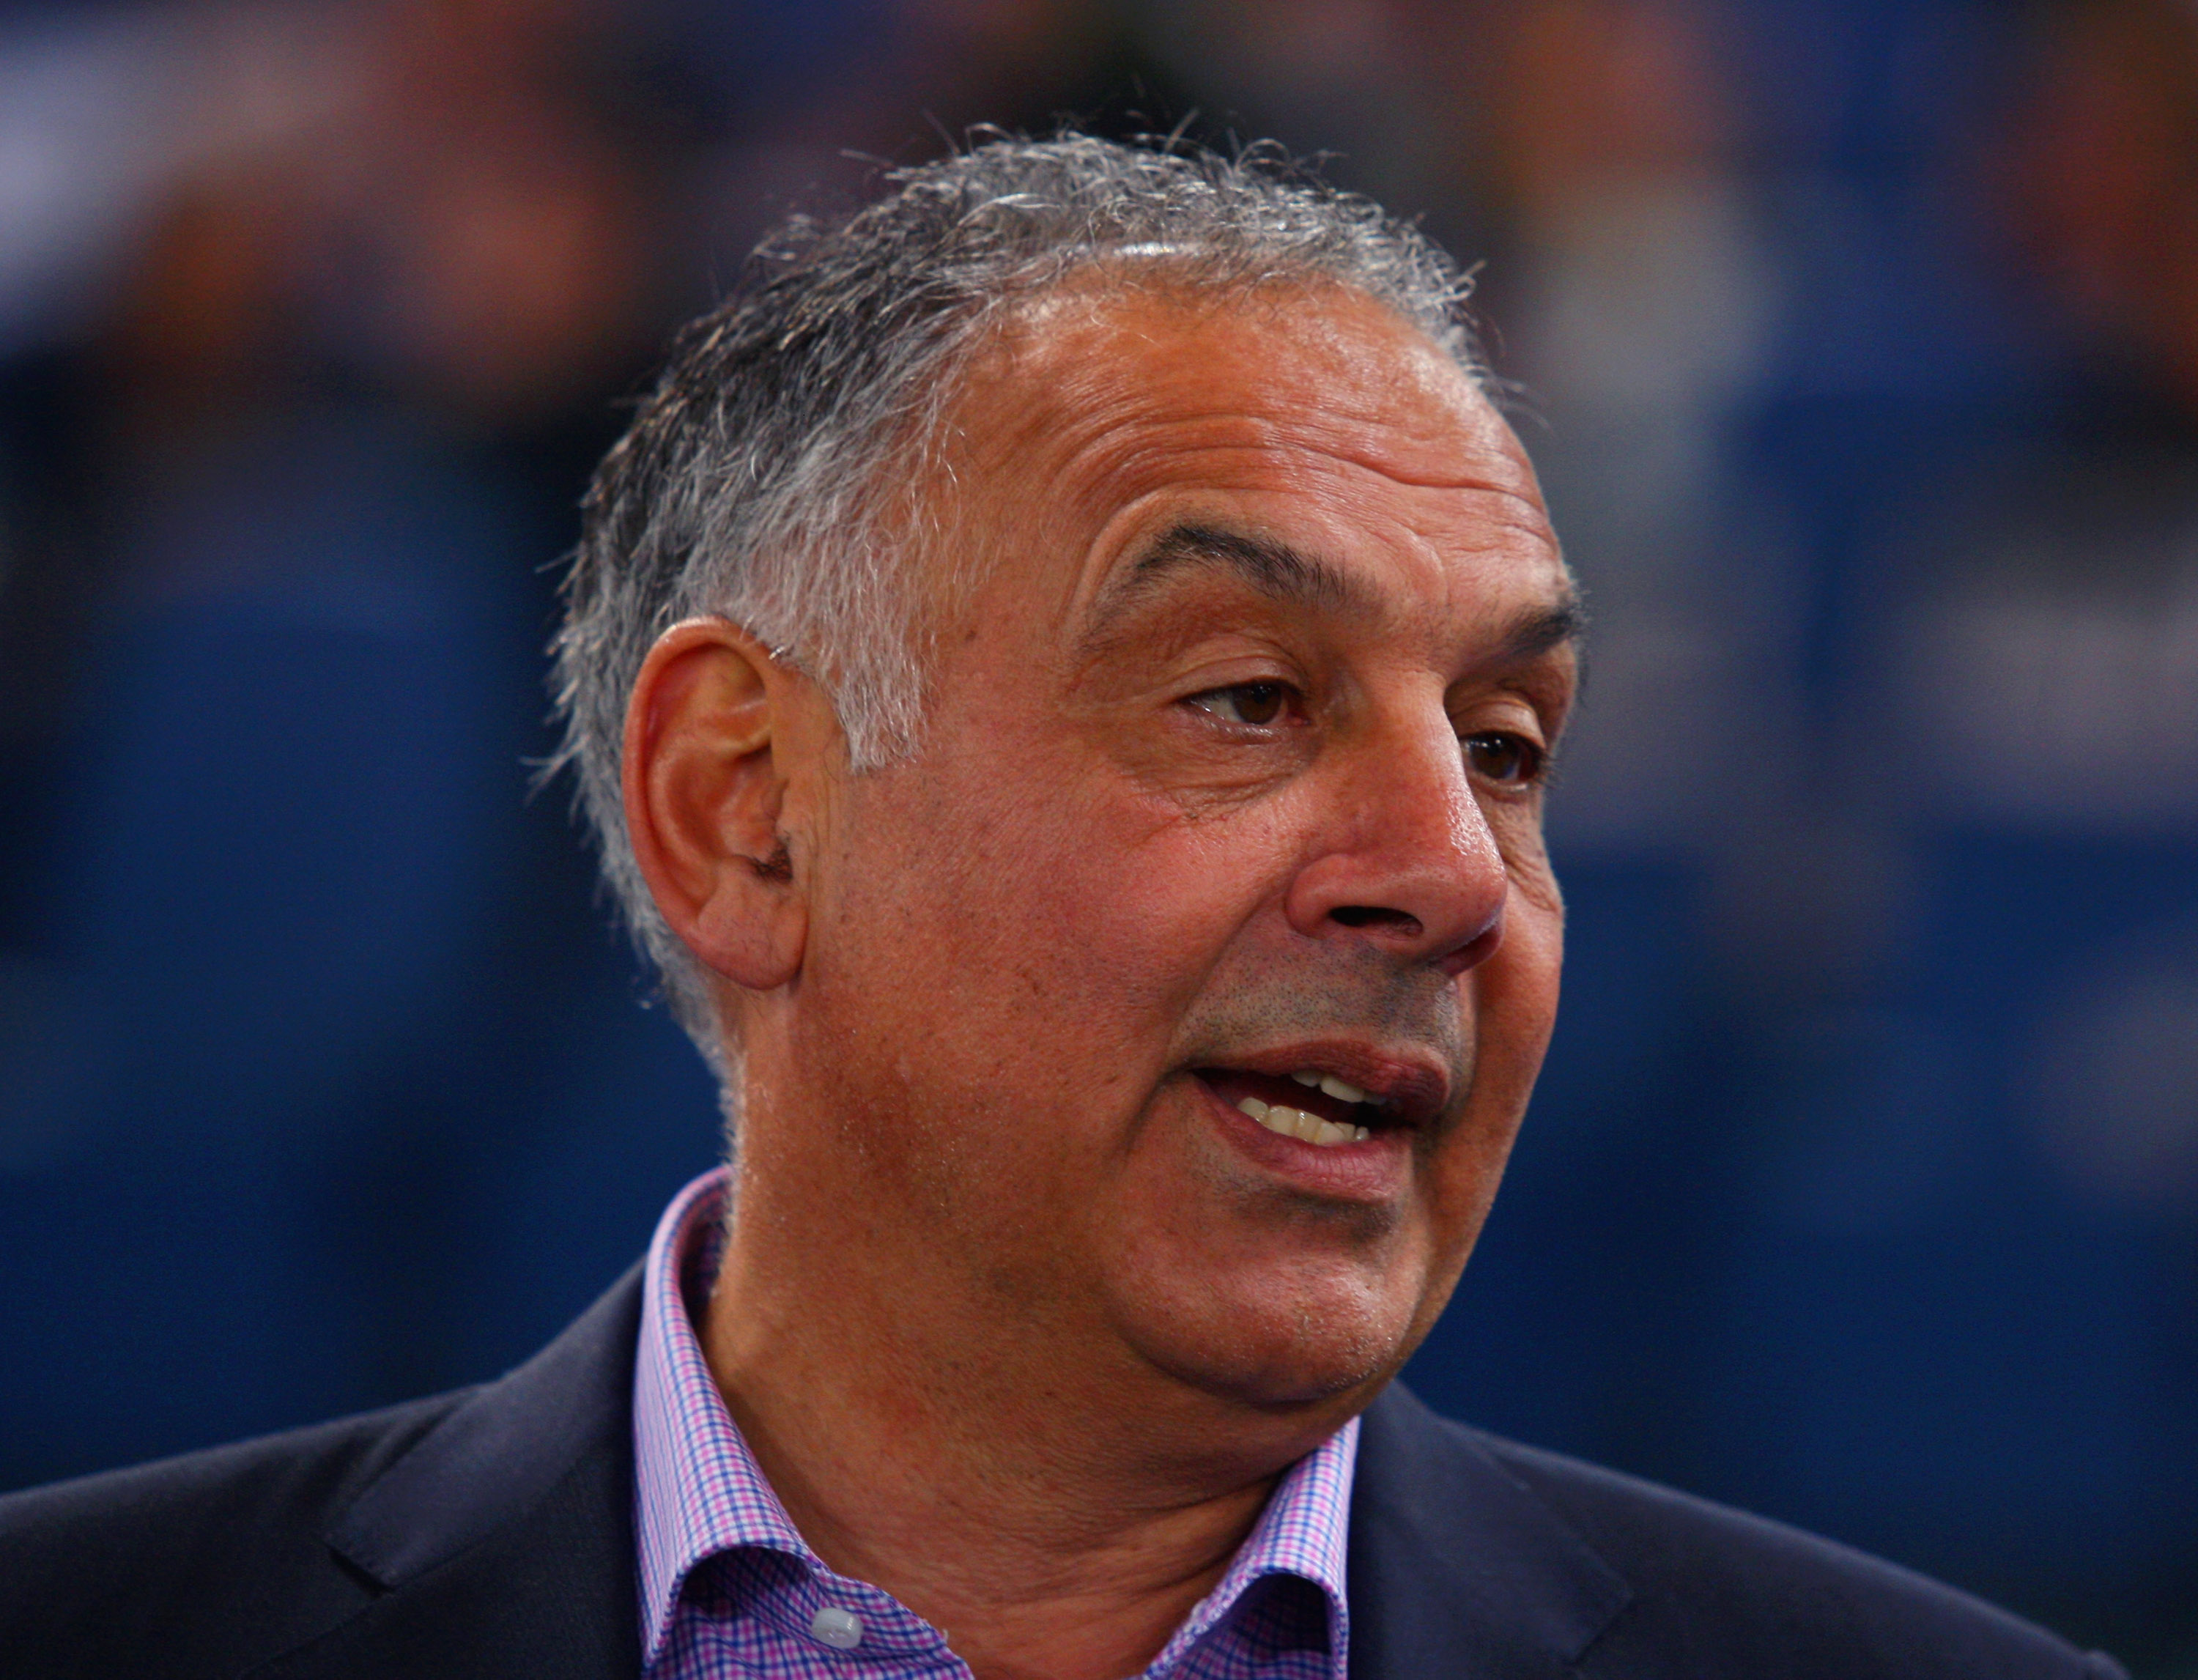 ROME, ITALY - MARCH 02:  AS Roma President James Pallotta looks on during the Serie A match between AS Roma and Juventus FC at Stadio Olimpico on March 2, 2015 in Rome, Italy.  (Photo by Paolo Bruno/Getty Images)